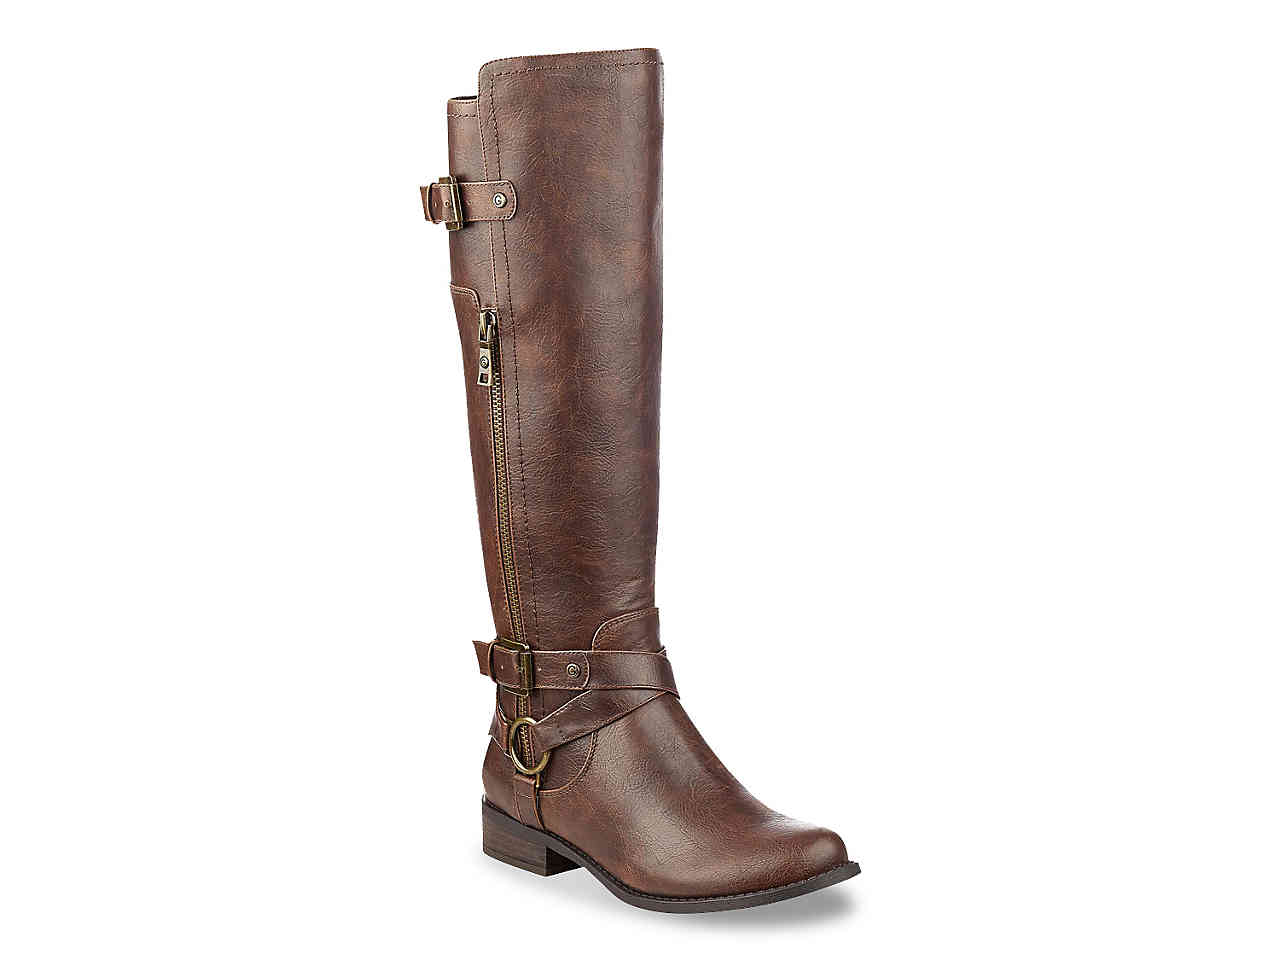 Riding boots herly wide calf riding boot CYHCFJQ